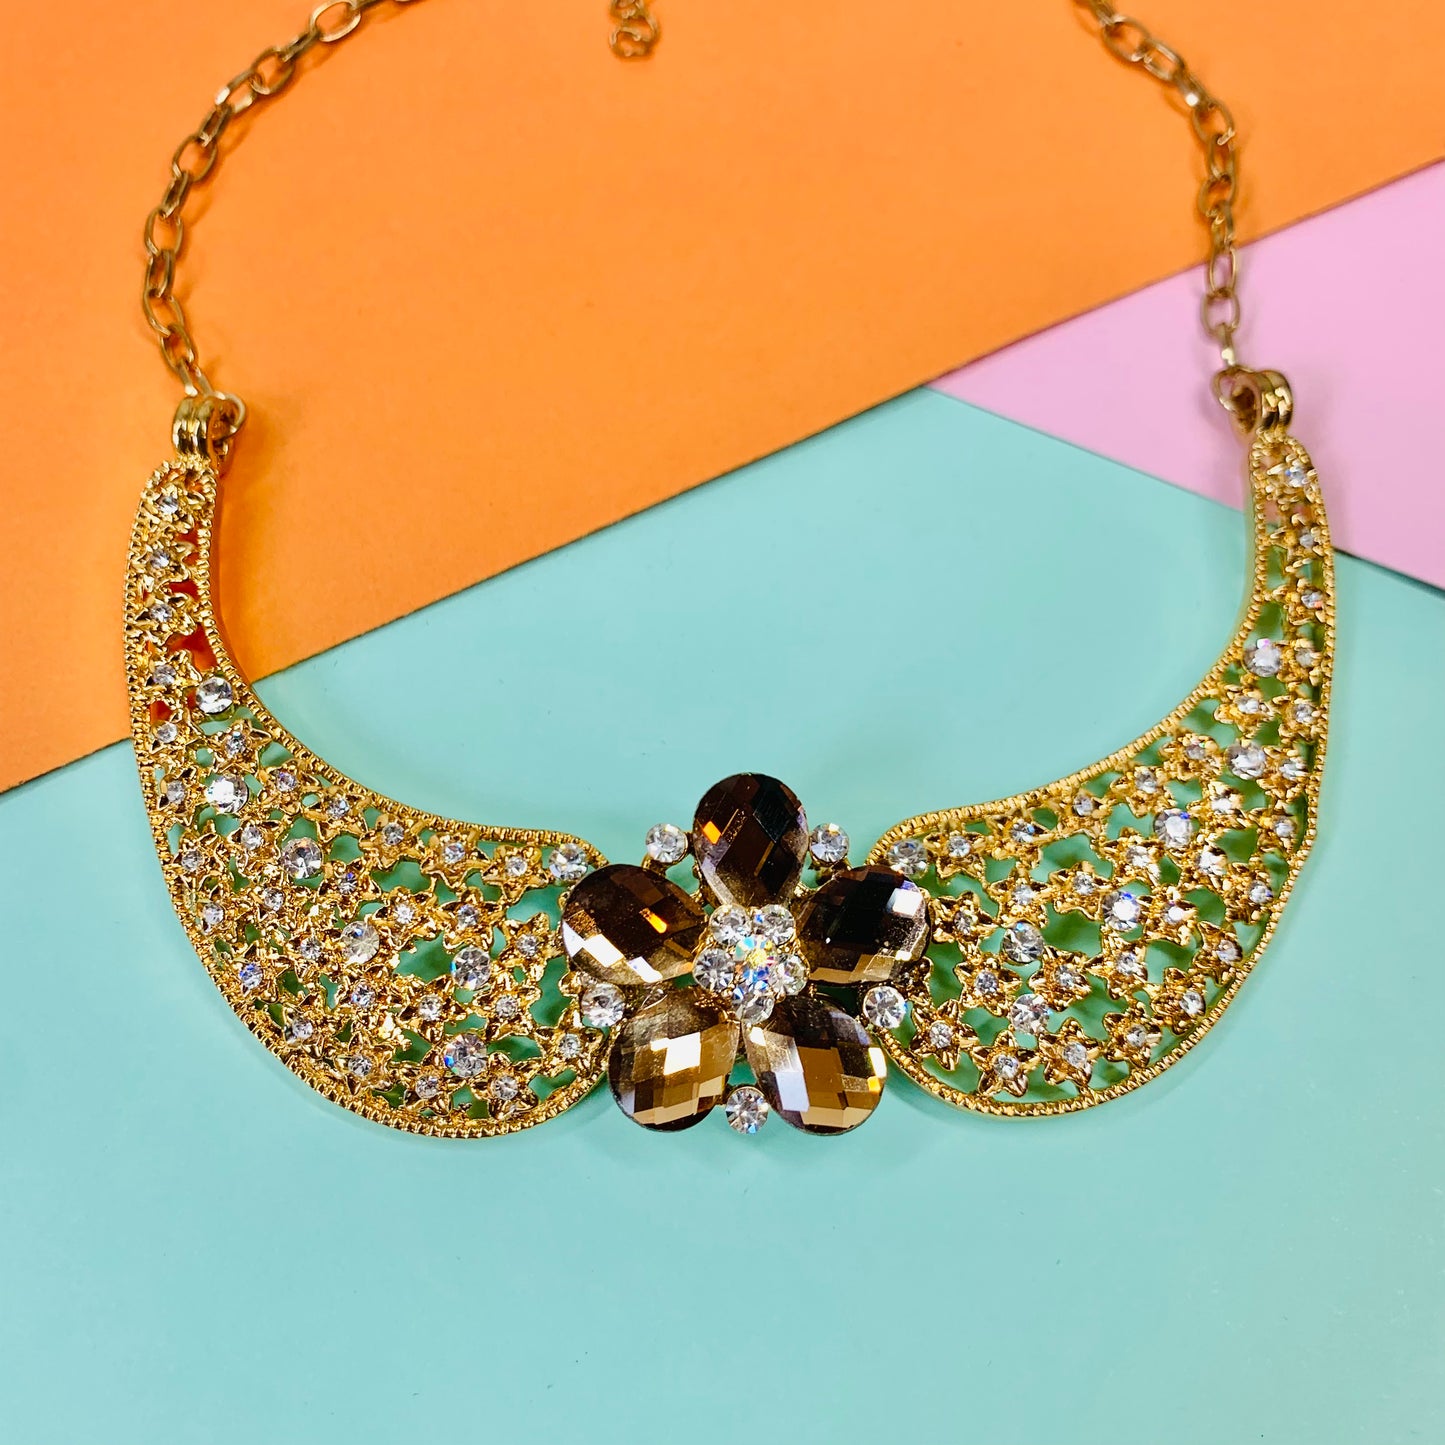 1980s Coro triple plated gold statement necklace with daisy crystals pendant and rhinestones